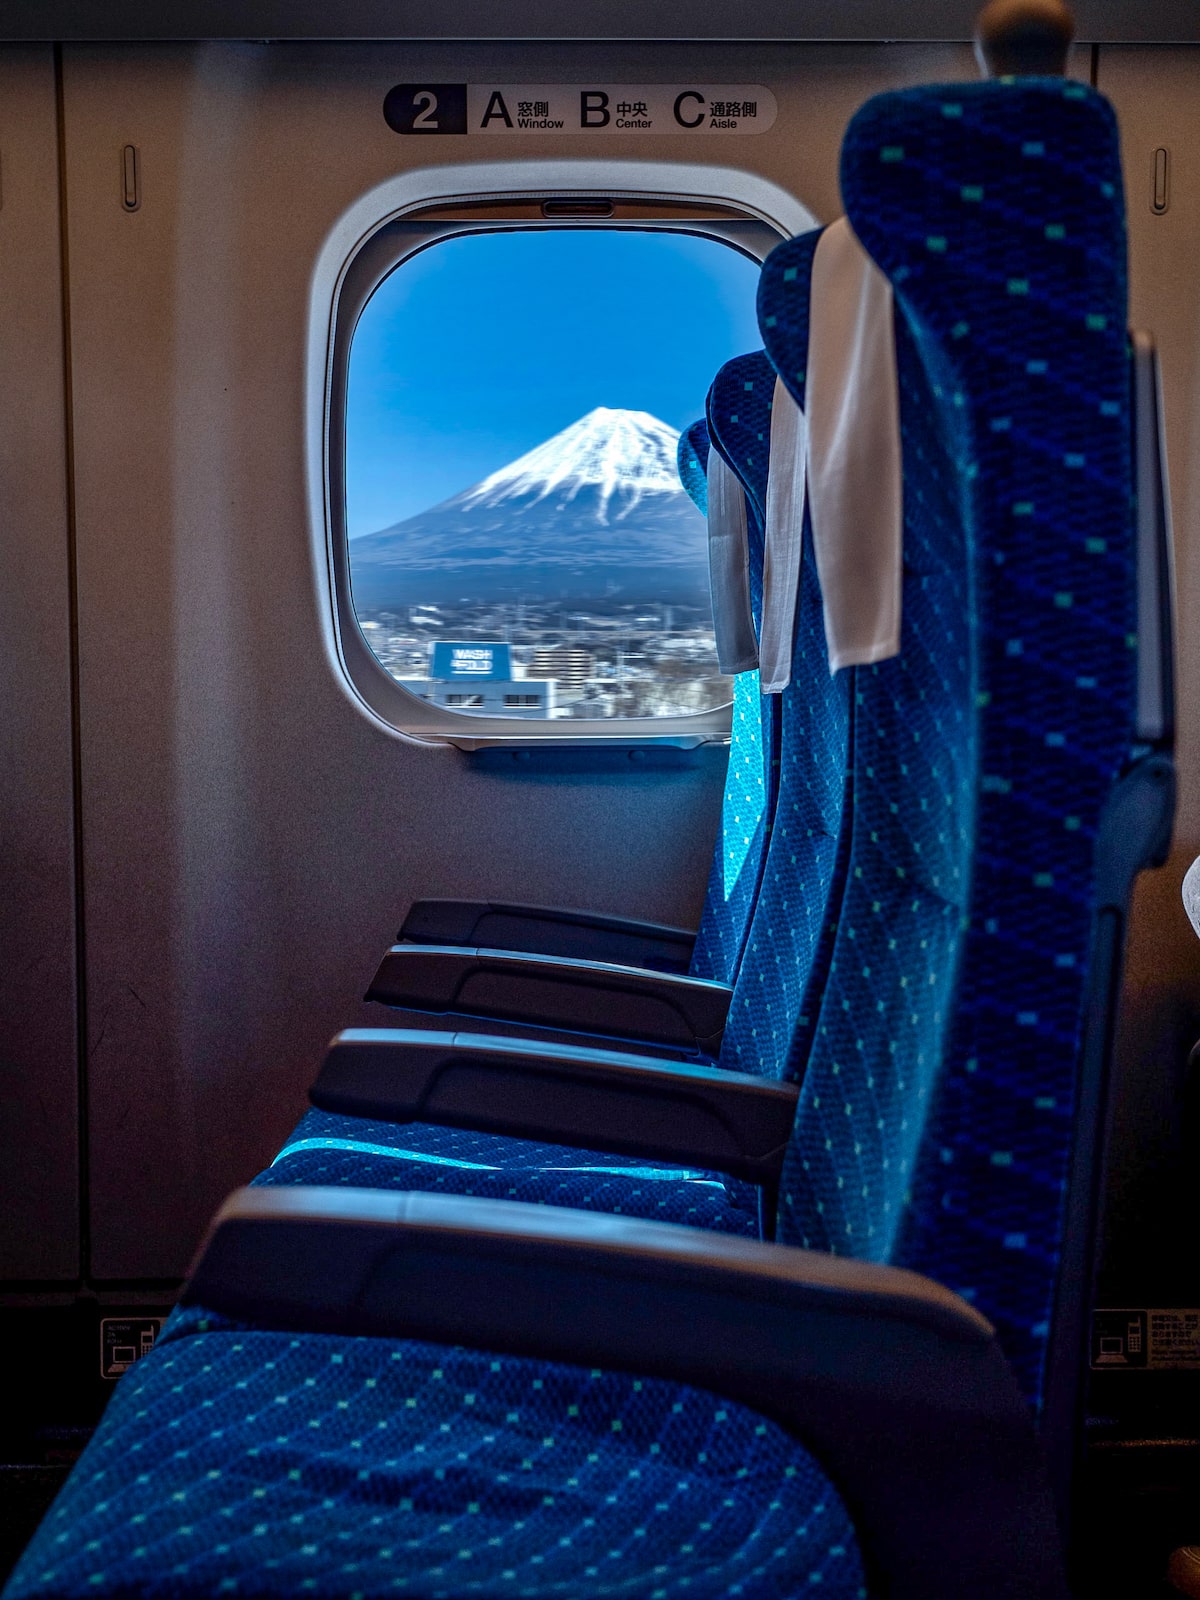 Train seats next to the window, which shows a striking snow-capped mountain.